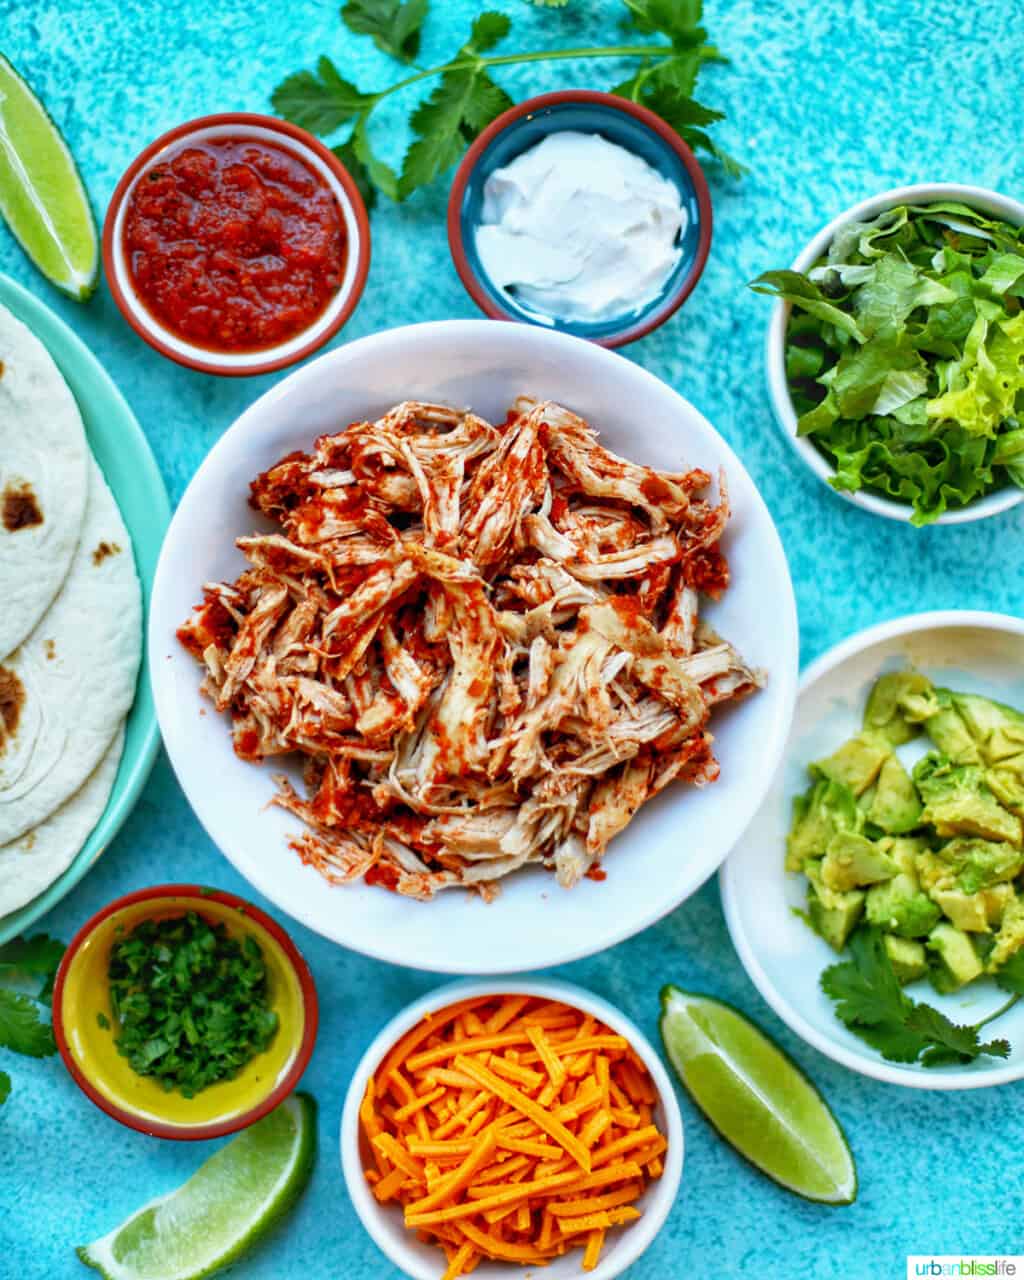 Instant Pot Salsa Chicken with salsa, sour cream, cheese, and other toppings for tacos